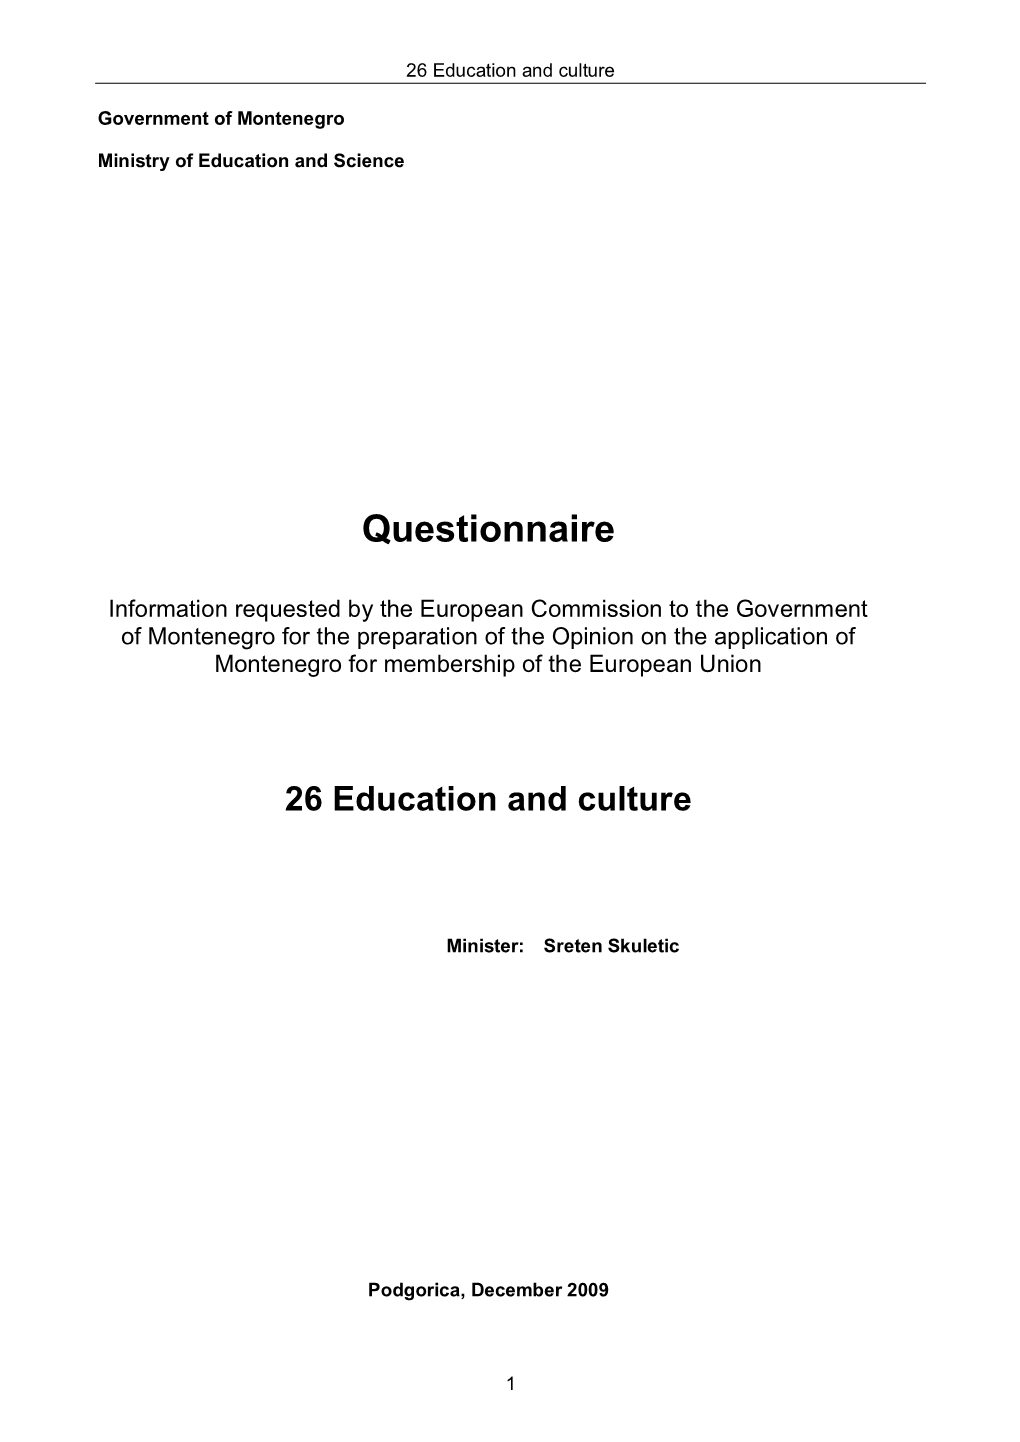 Questionnaire: 26 Education and Culture